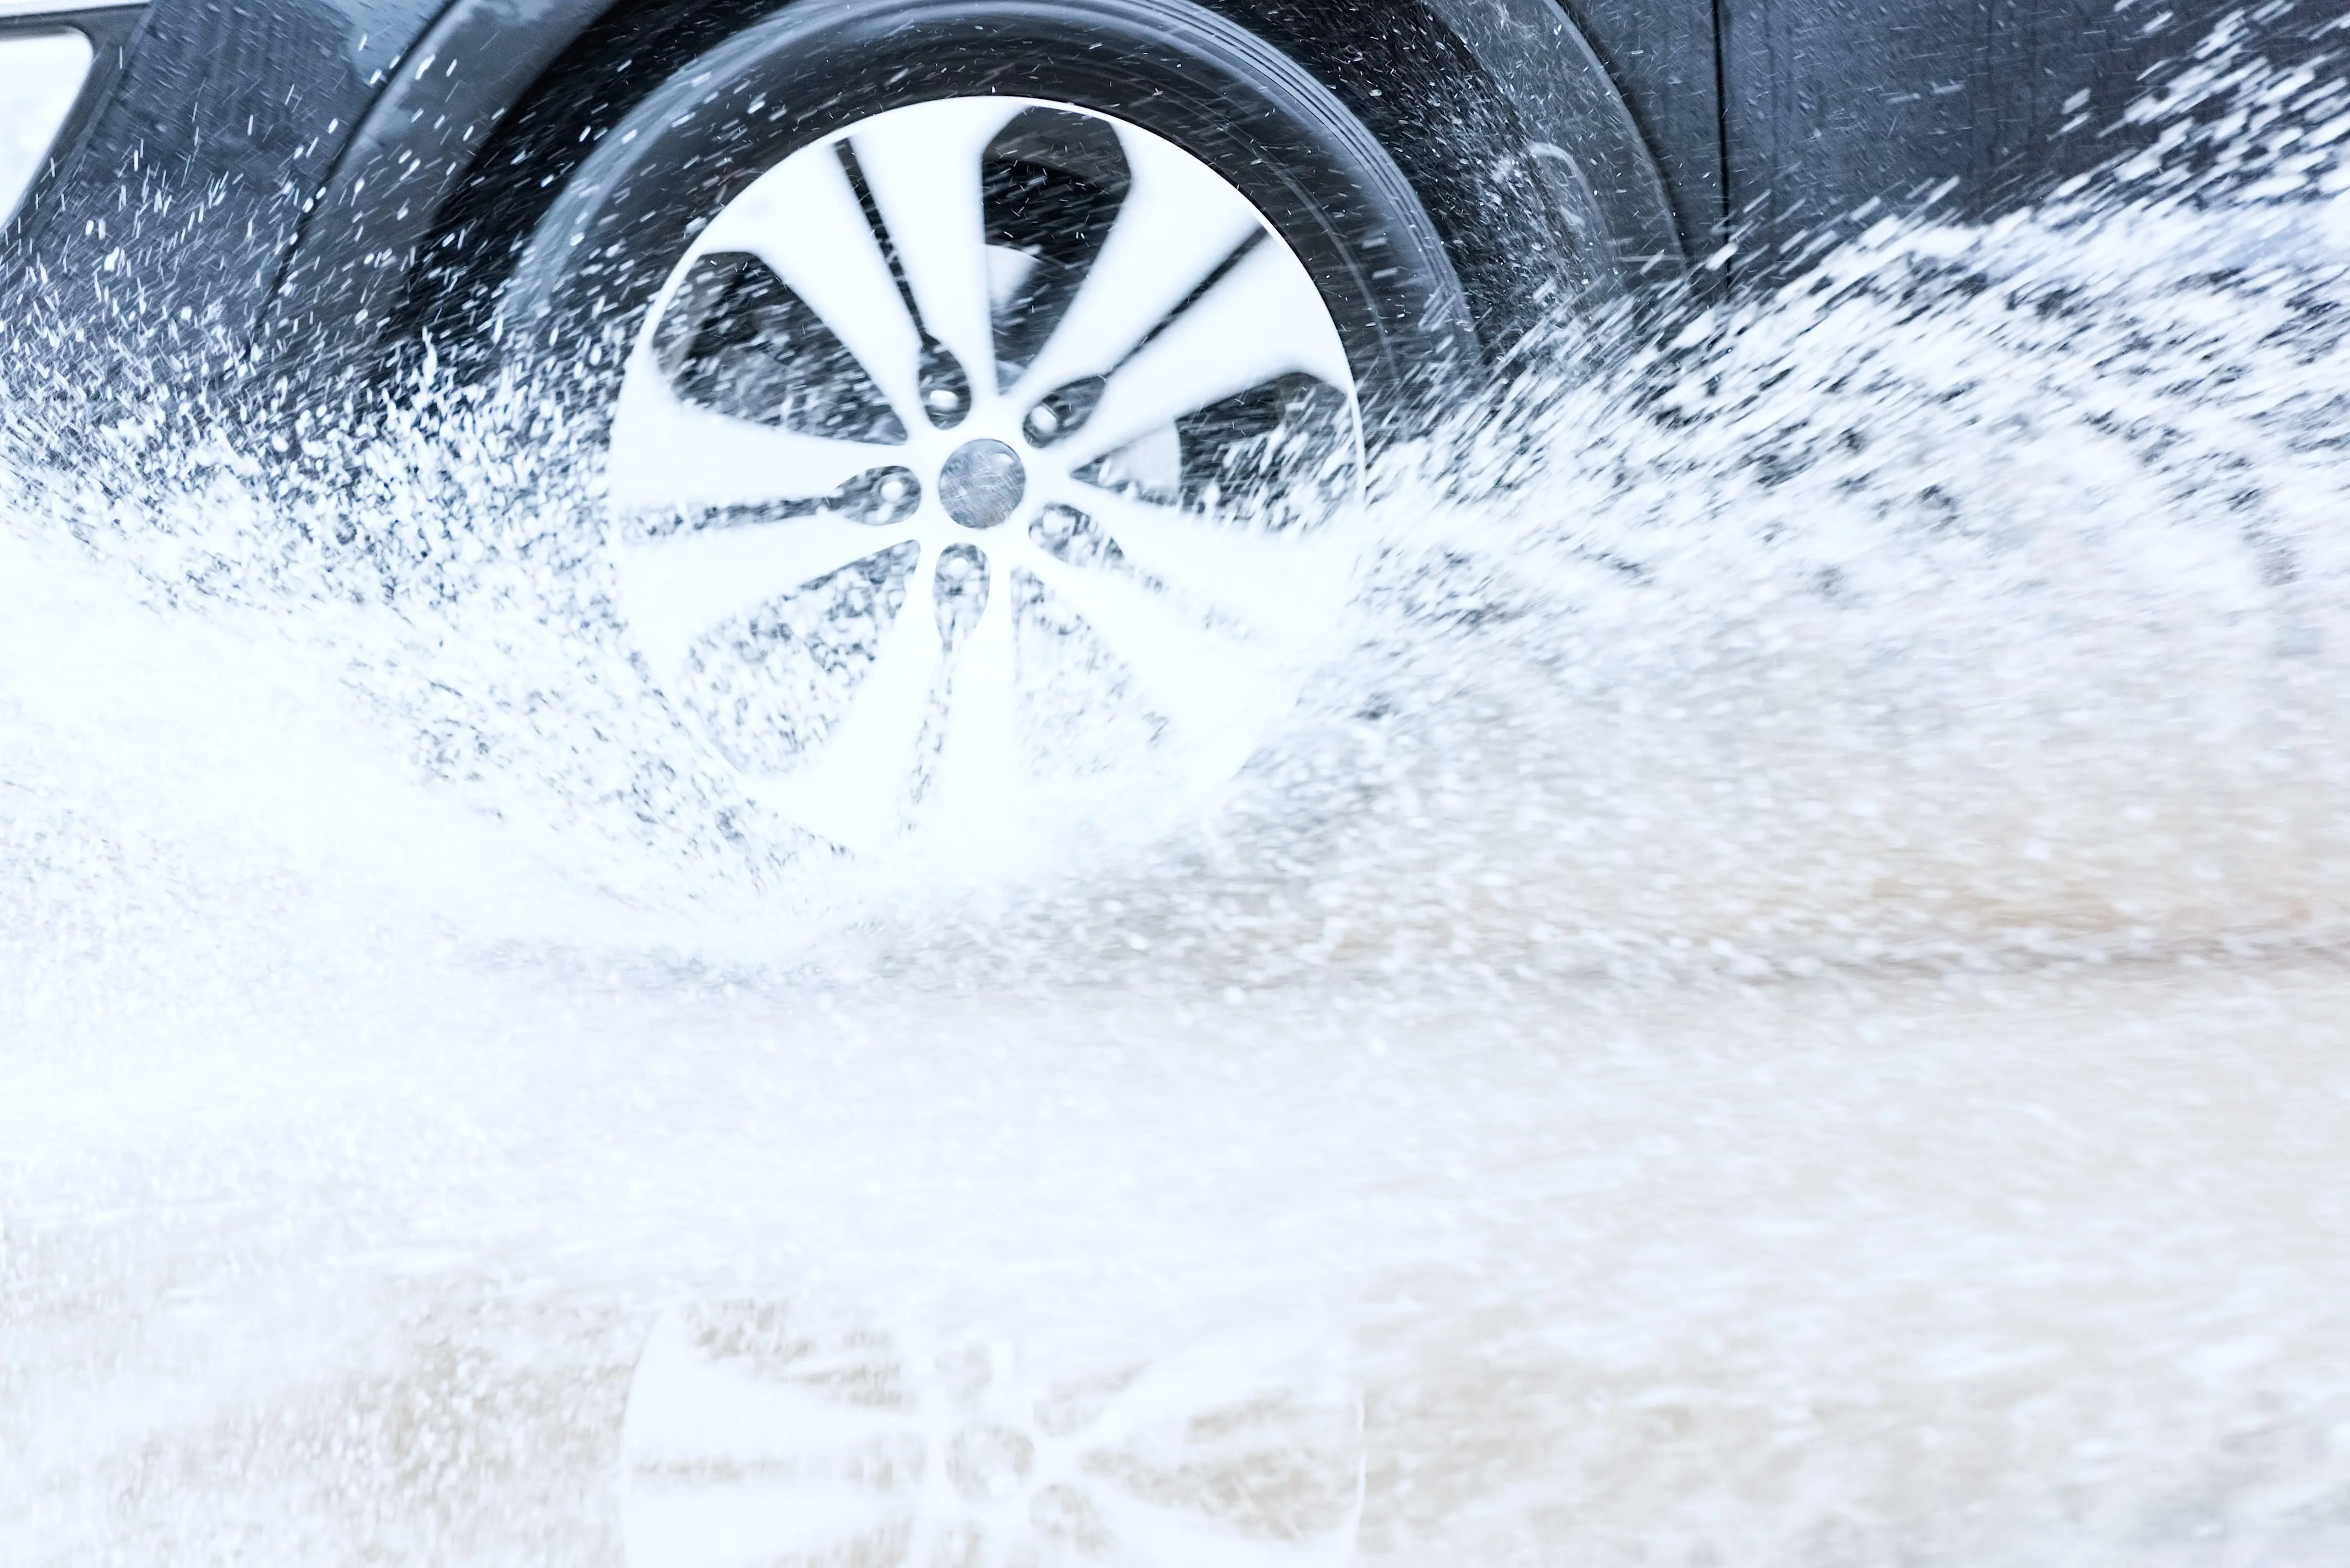 Carolina Collision and Frame Service | Black car's tire spinning in water and splashing